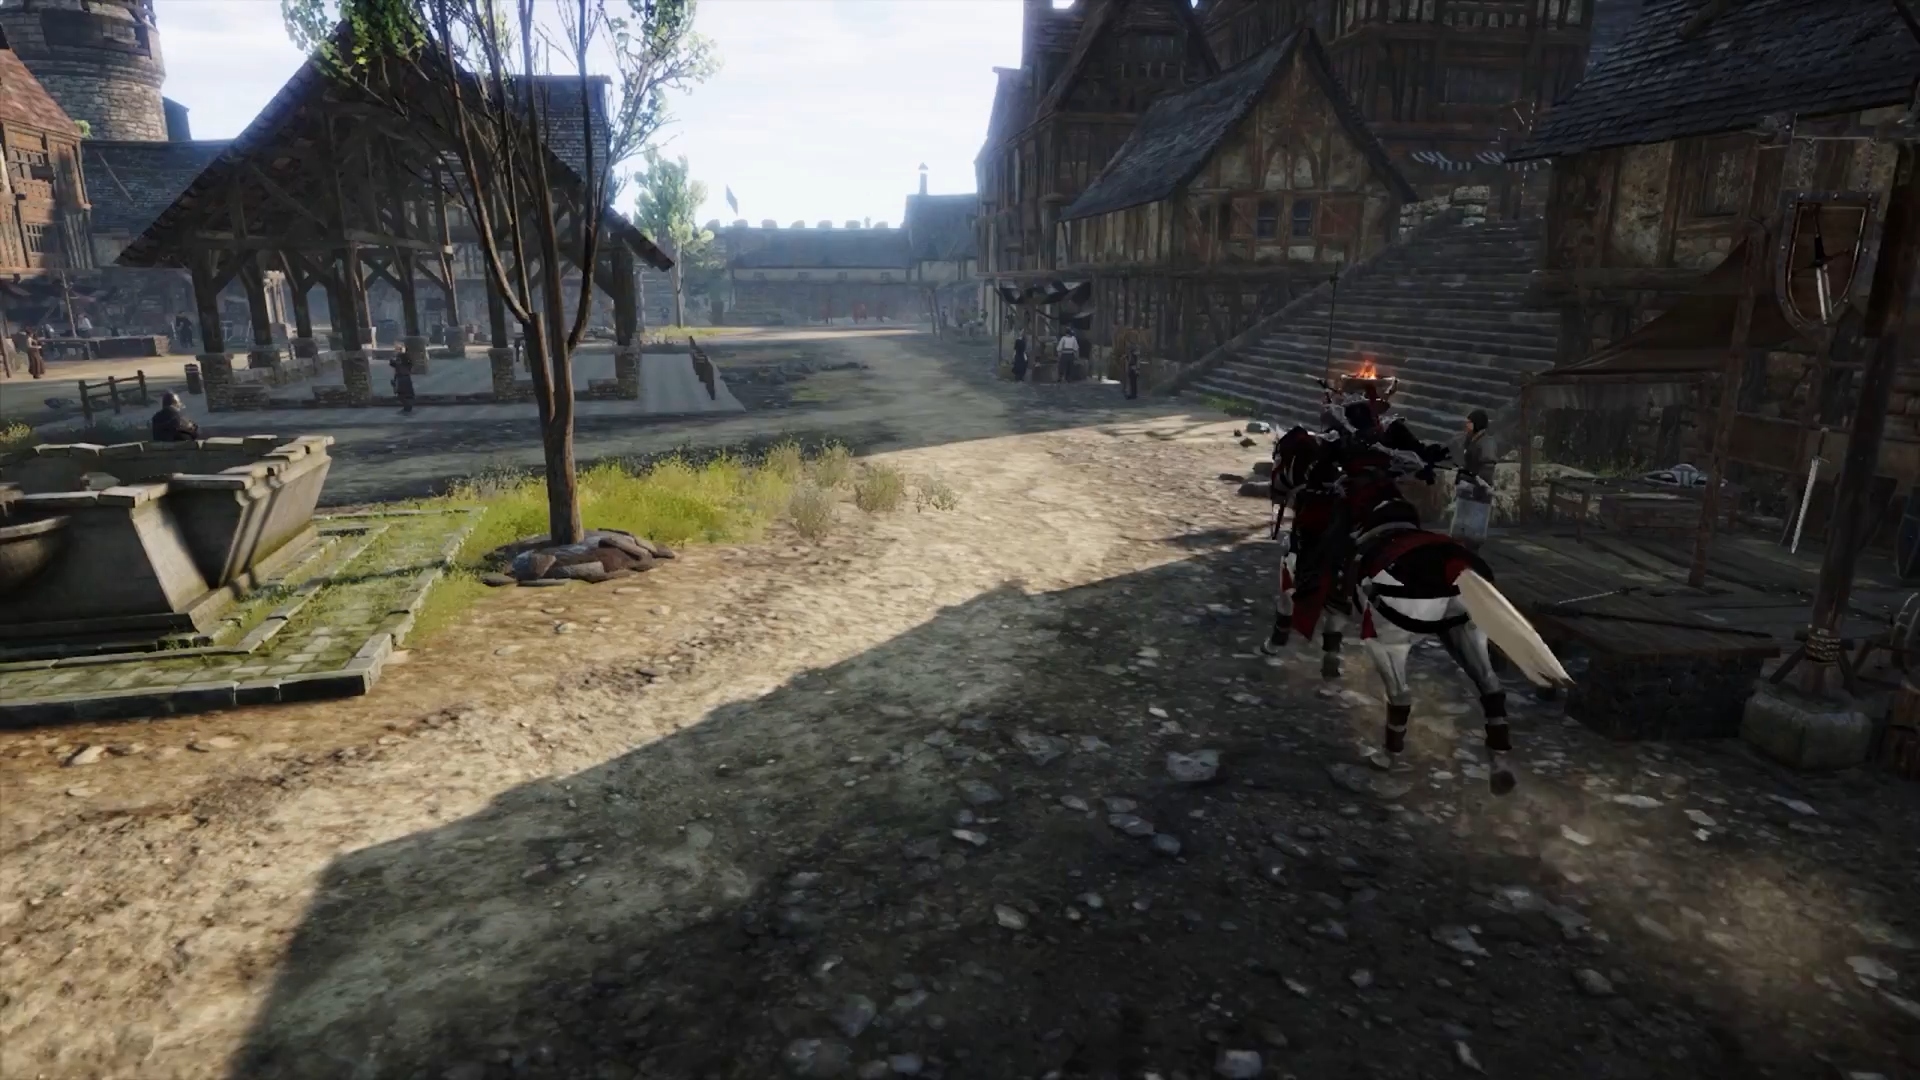 Best medieval games: Conqueror's Blade. Image shows a village with a person riding past on horseback,